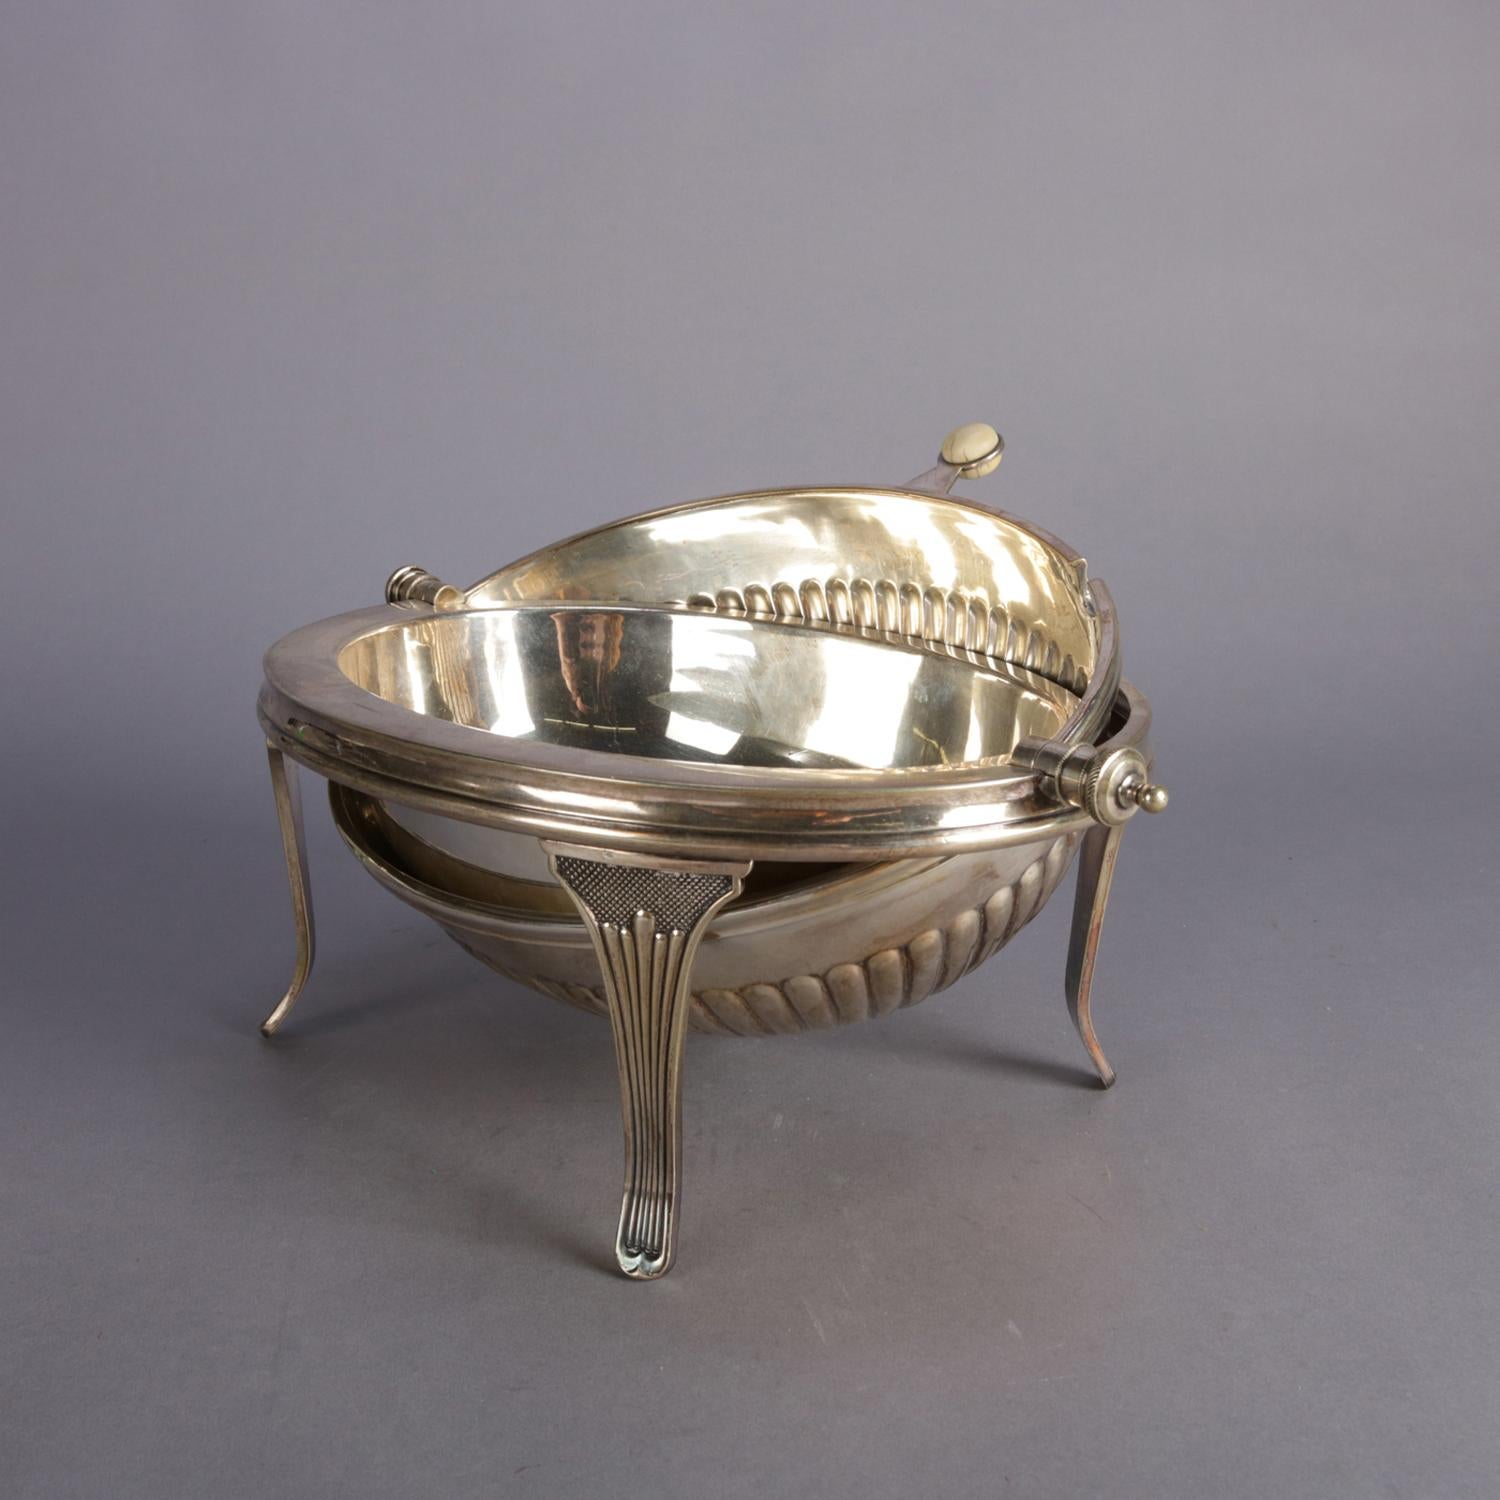 20th Century English Georgian Formal Silver Plate Serving Dish with Revolving Lid, circa 1920